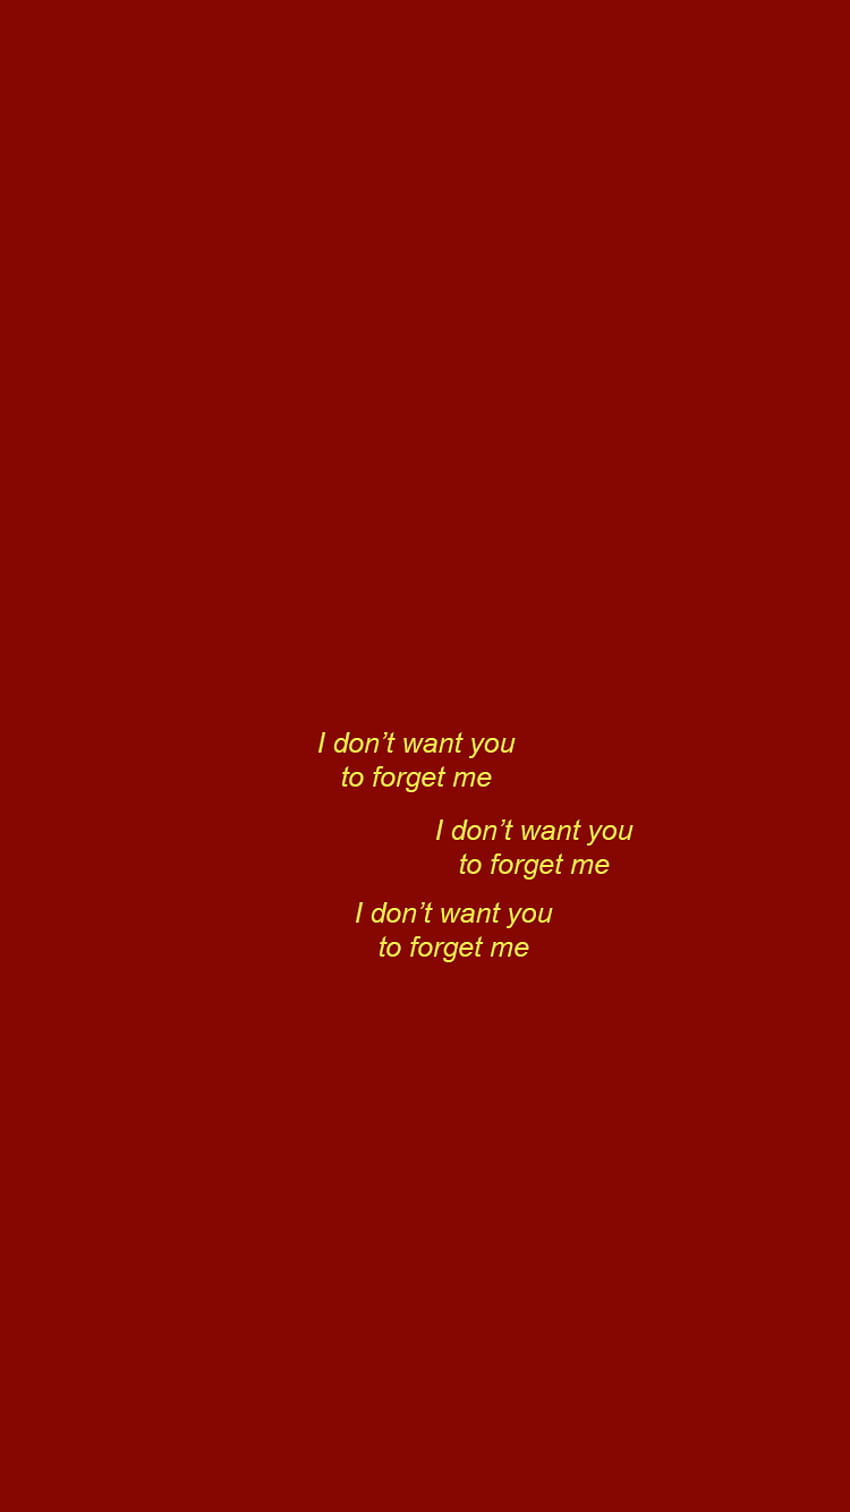 A red background with text that says i don't want to be your friend - Baddie